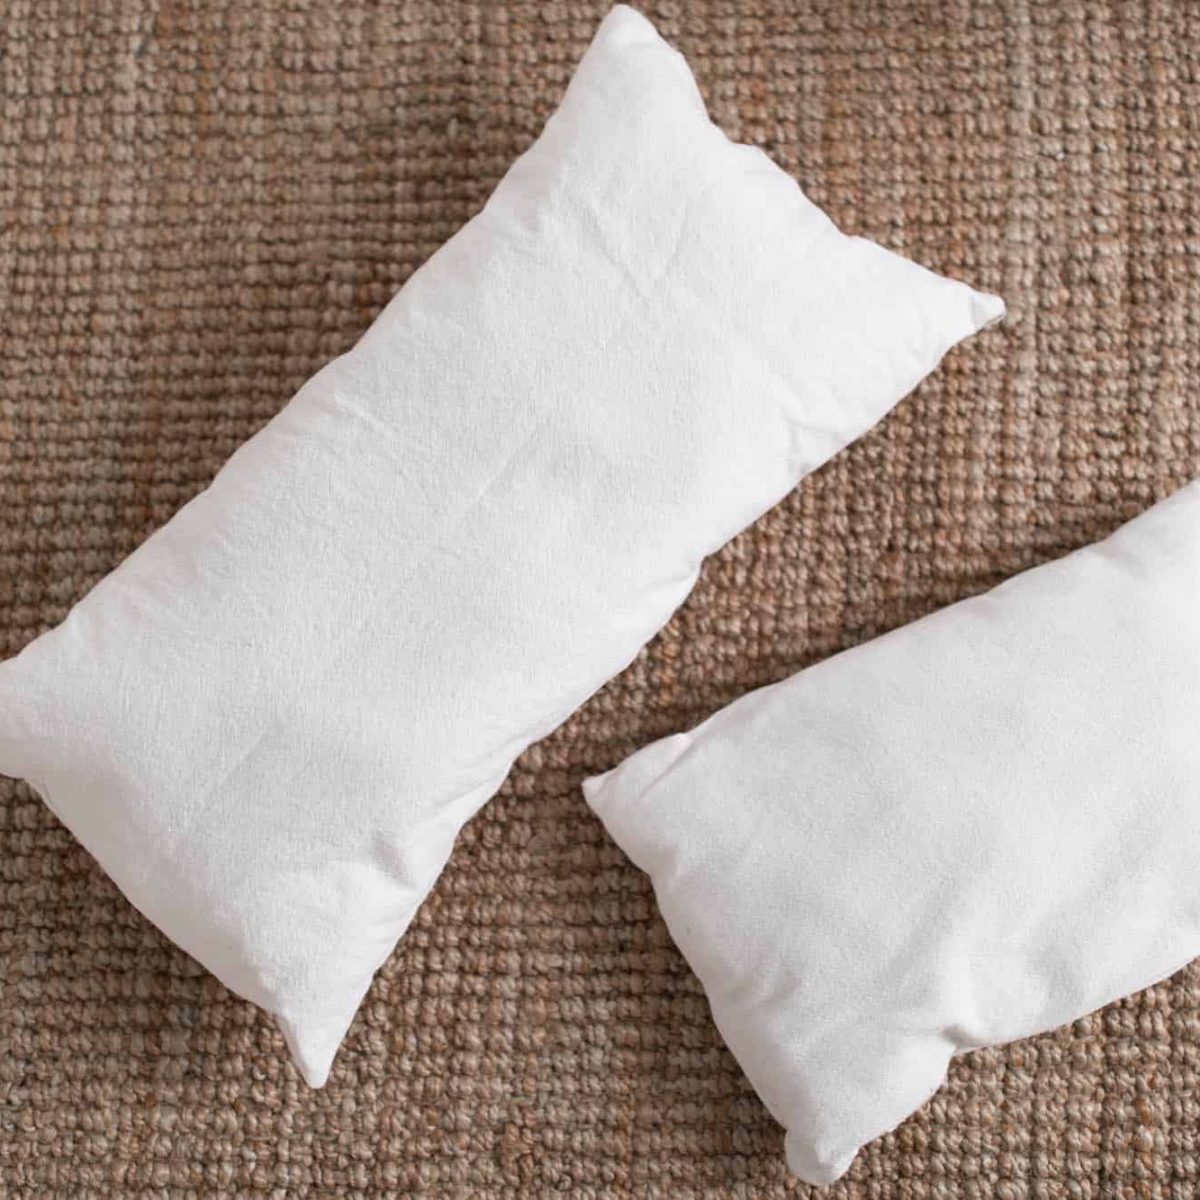 How To Make A Pillow Insert